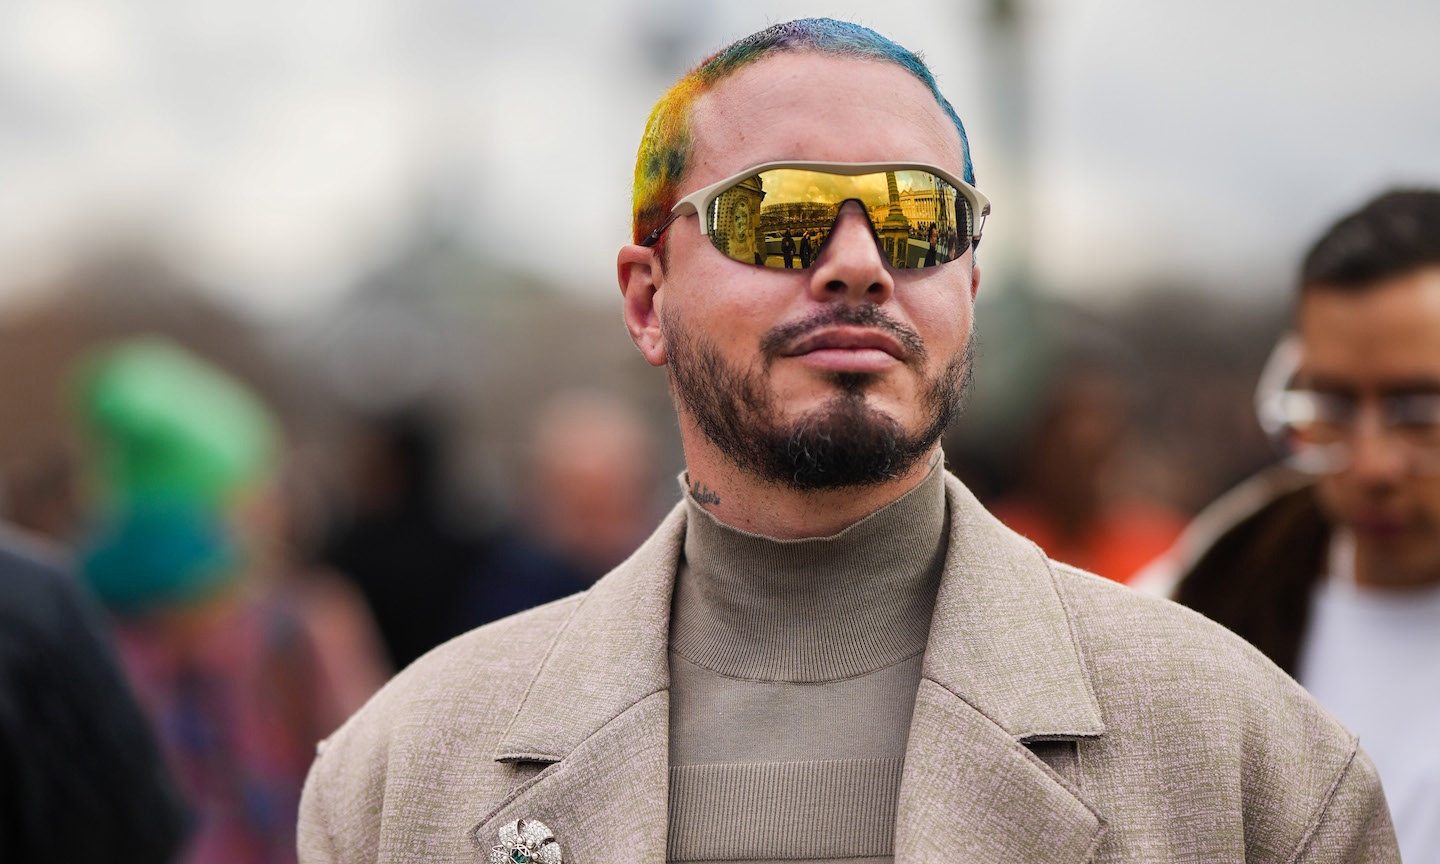 Vevo Newfront To Feature Live Performance By J Balvin 04/26/2023